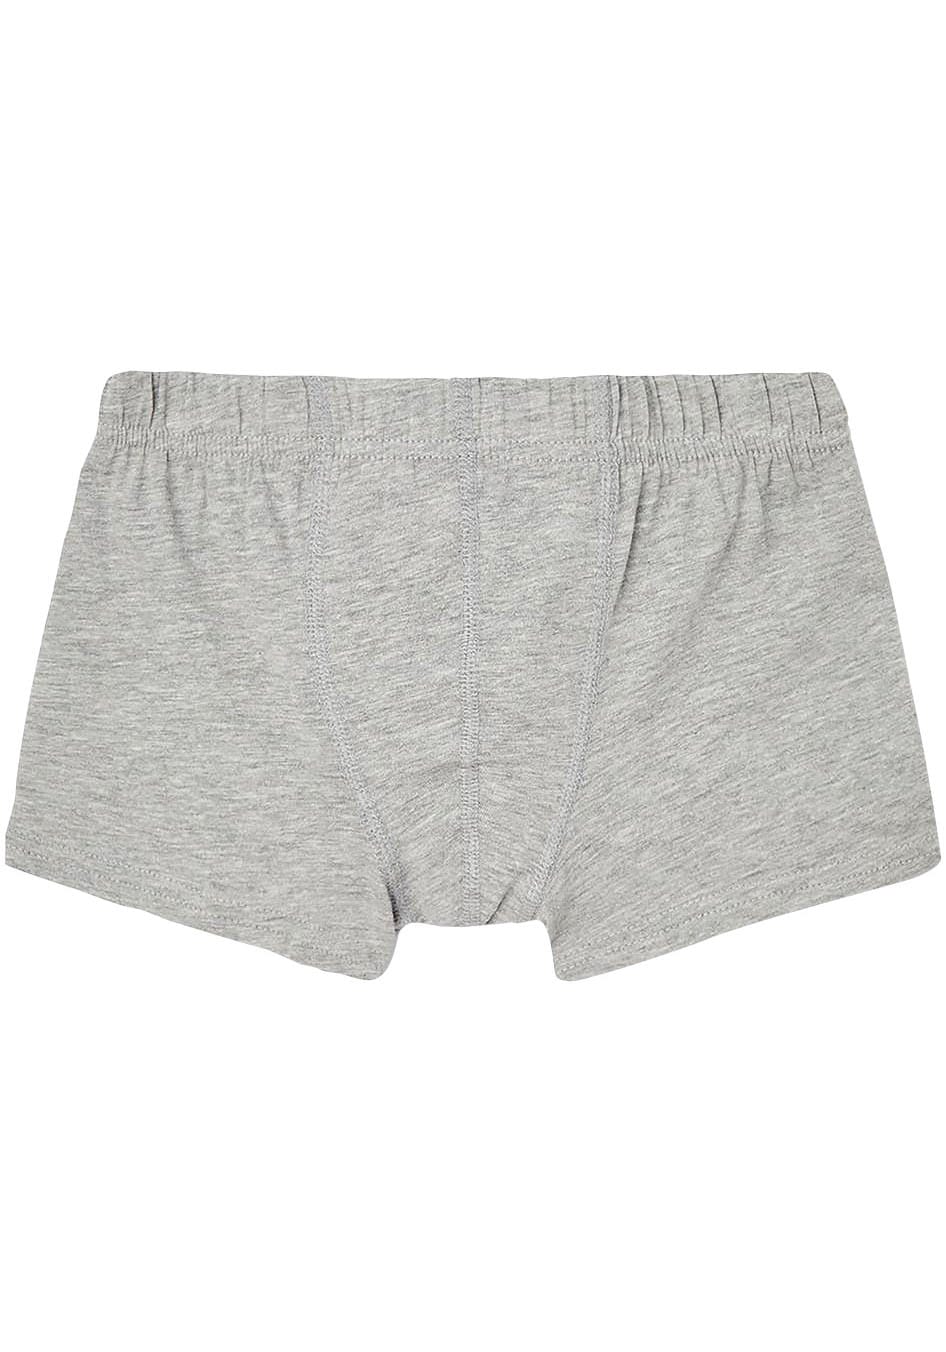 Name It Boxershorts NOOS«, 3 MELANGE bei »NKMTIGHTS 3P OTTO FOOTBALL St.) (Packung, online